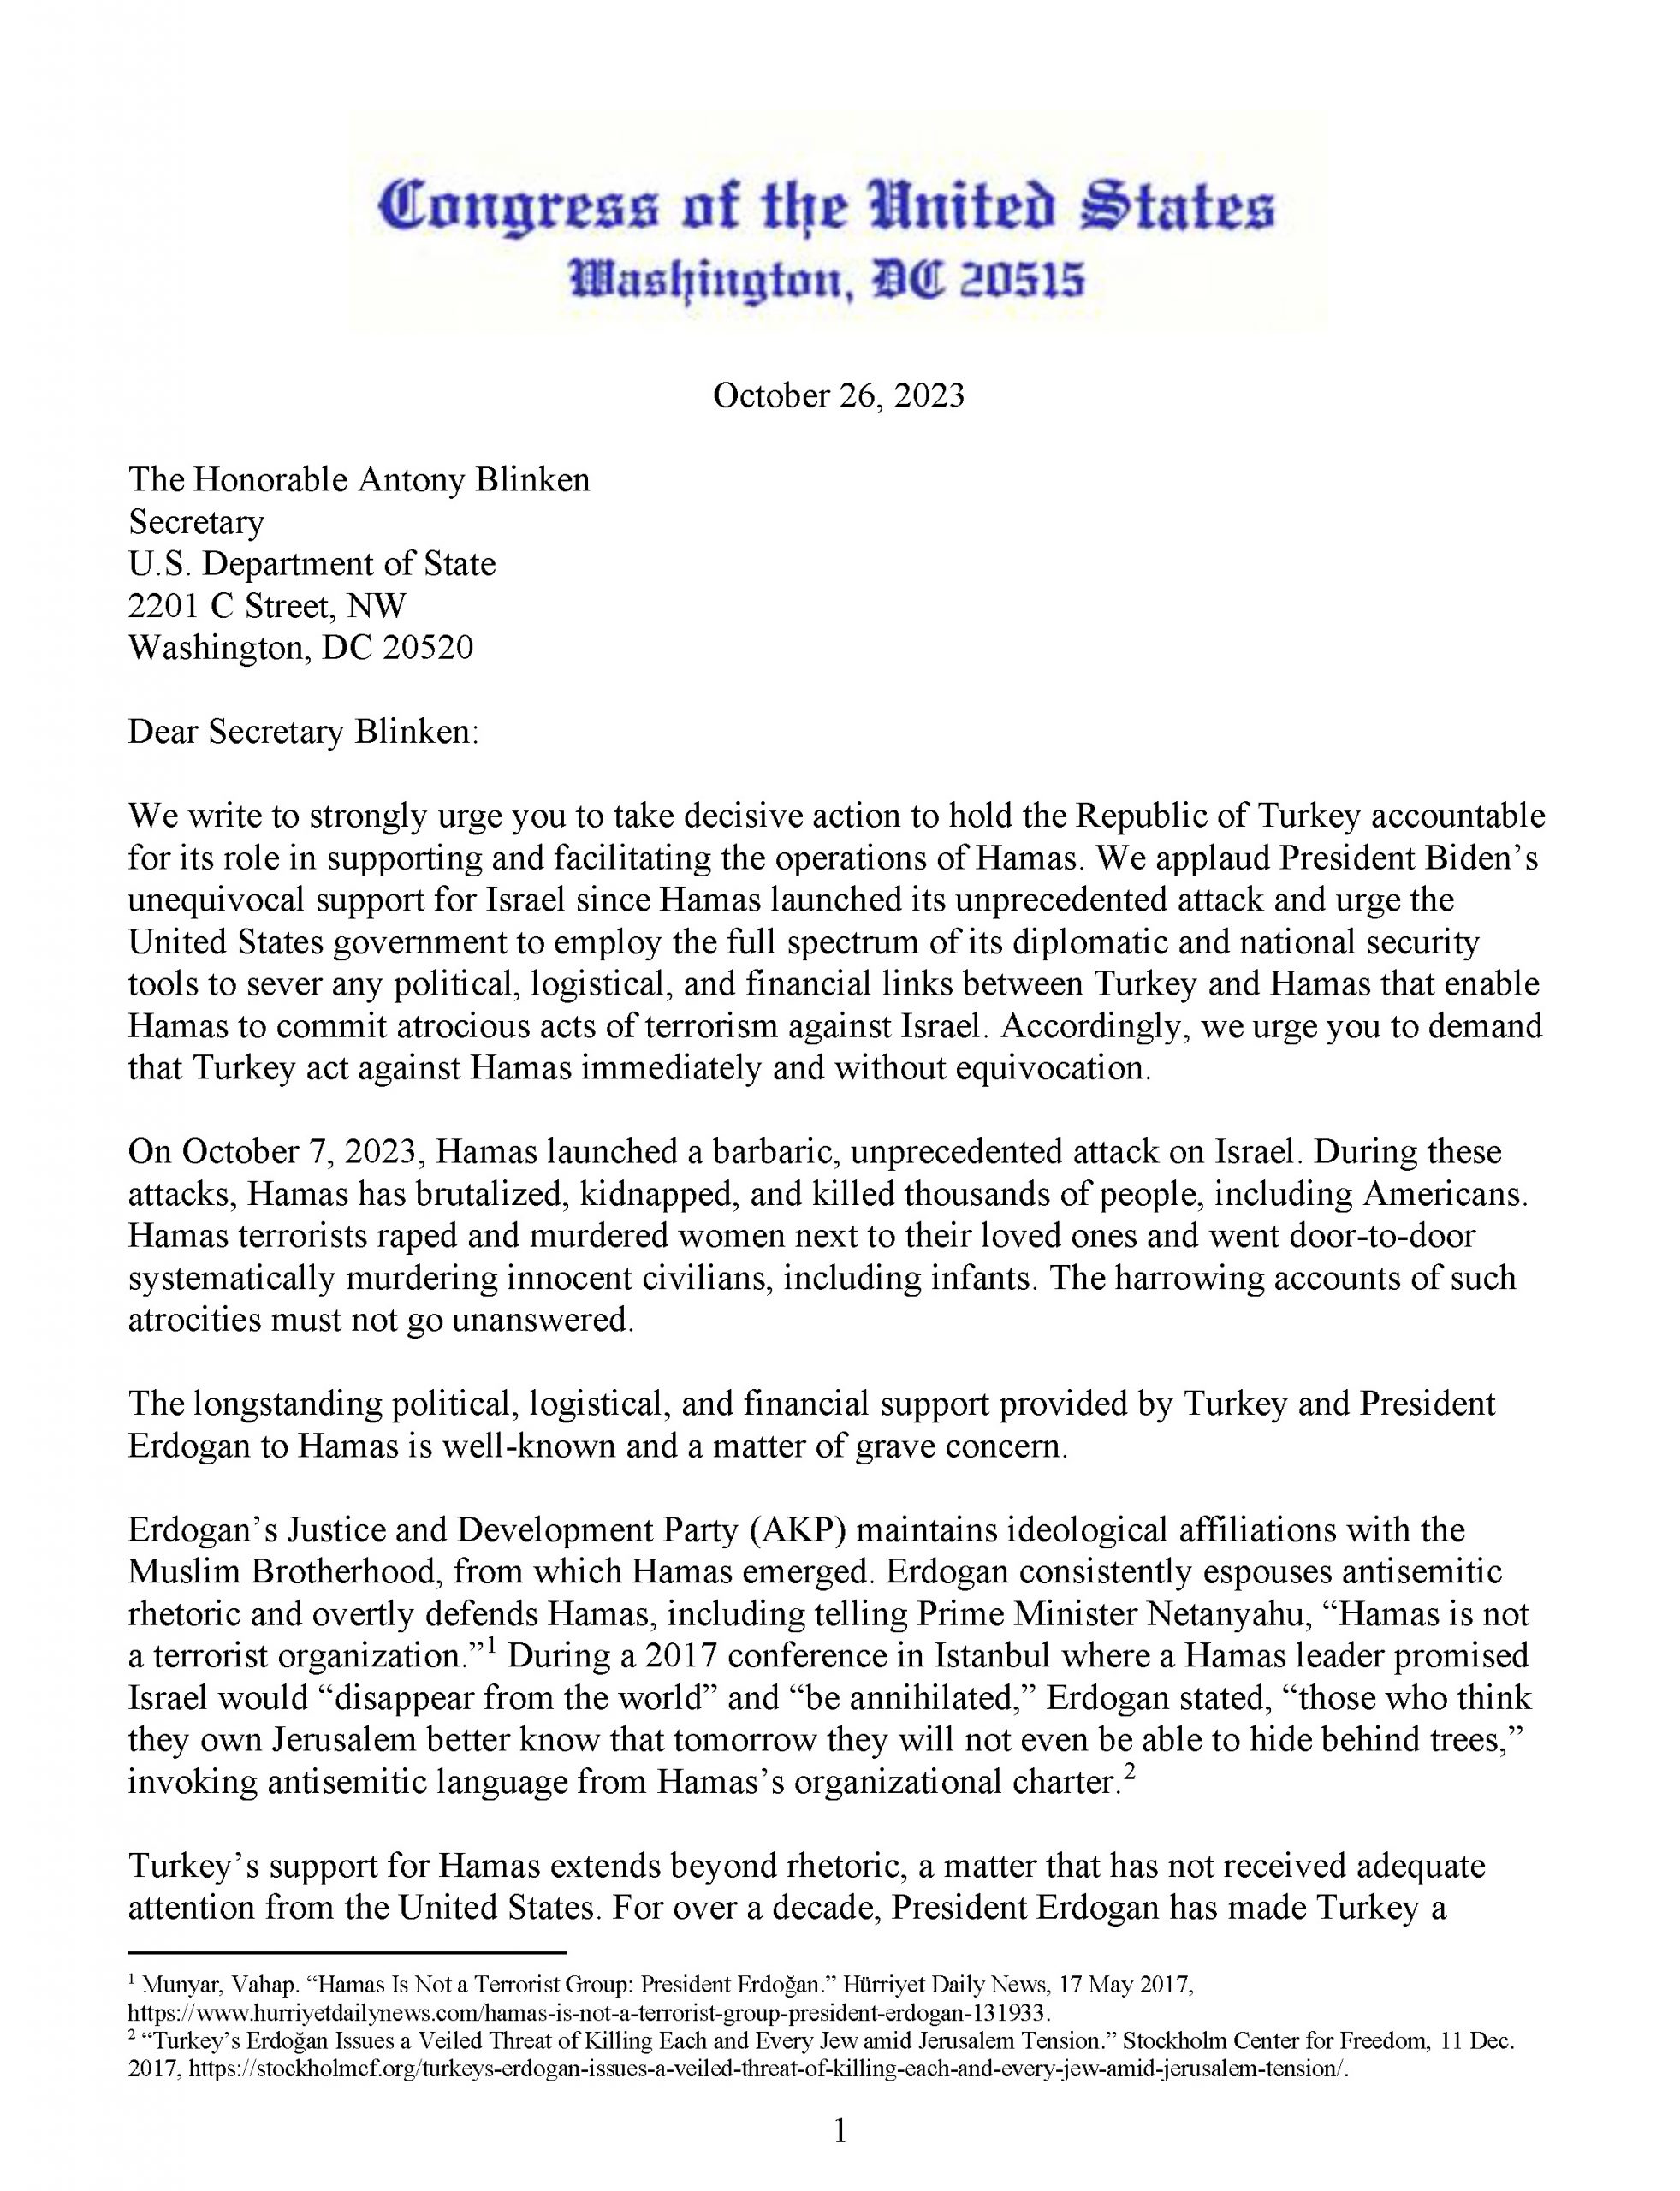 10.26.23 Rep. Pappas Letter to Secretary Blinken on Turkey's Support for Hamas_Page_1